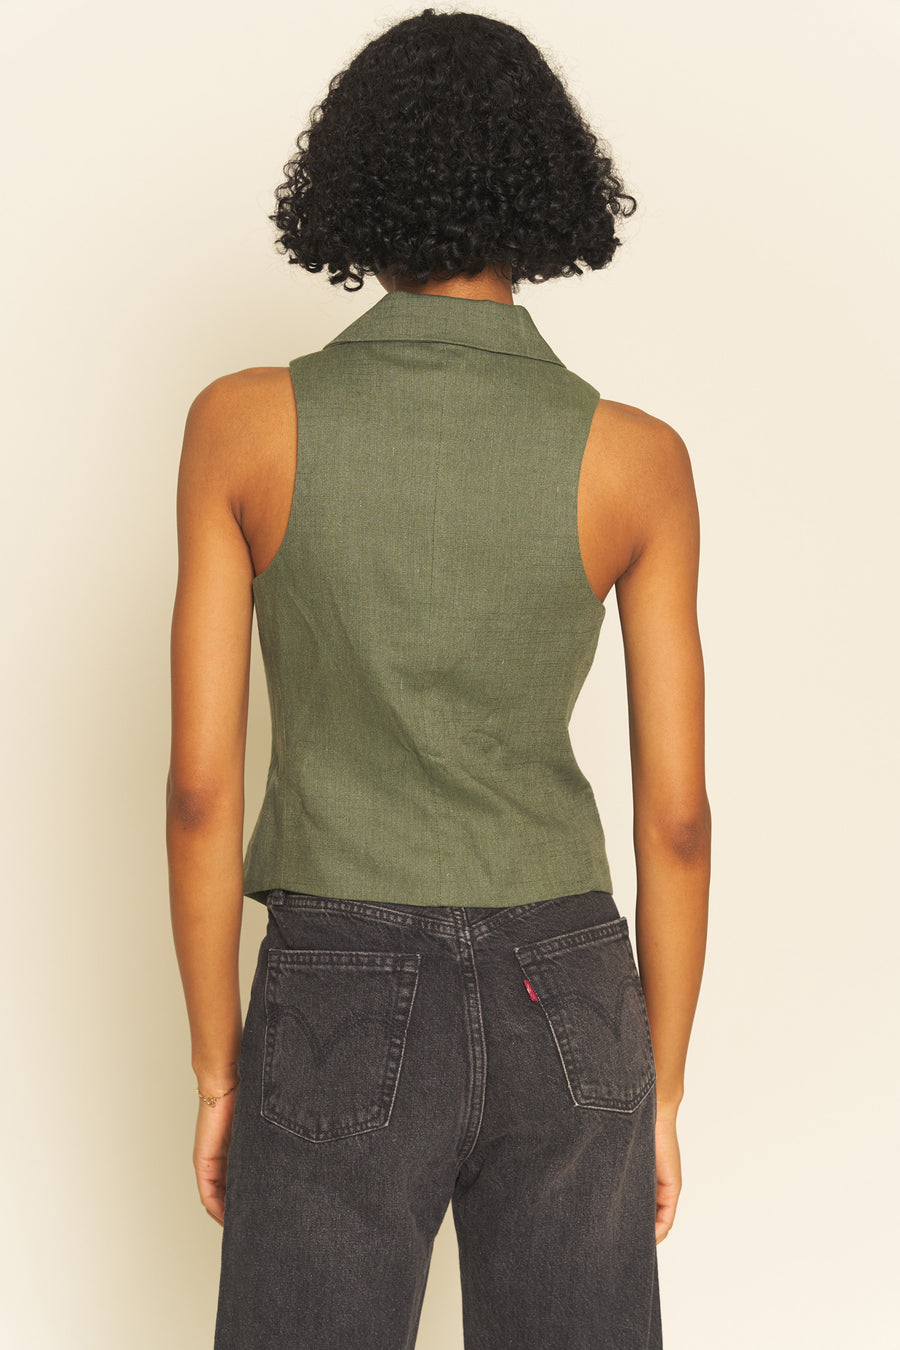 No Srcipt image - Images of 6 of 6 V Neck Linen Vest Lapel Collar Slightly Fitted Silhouette Sleeveless Deep Green Color-Way Workwear Office Wear Professional Womens Style Fashion Neutral Staple Style